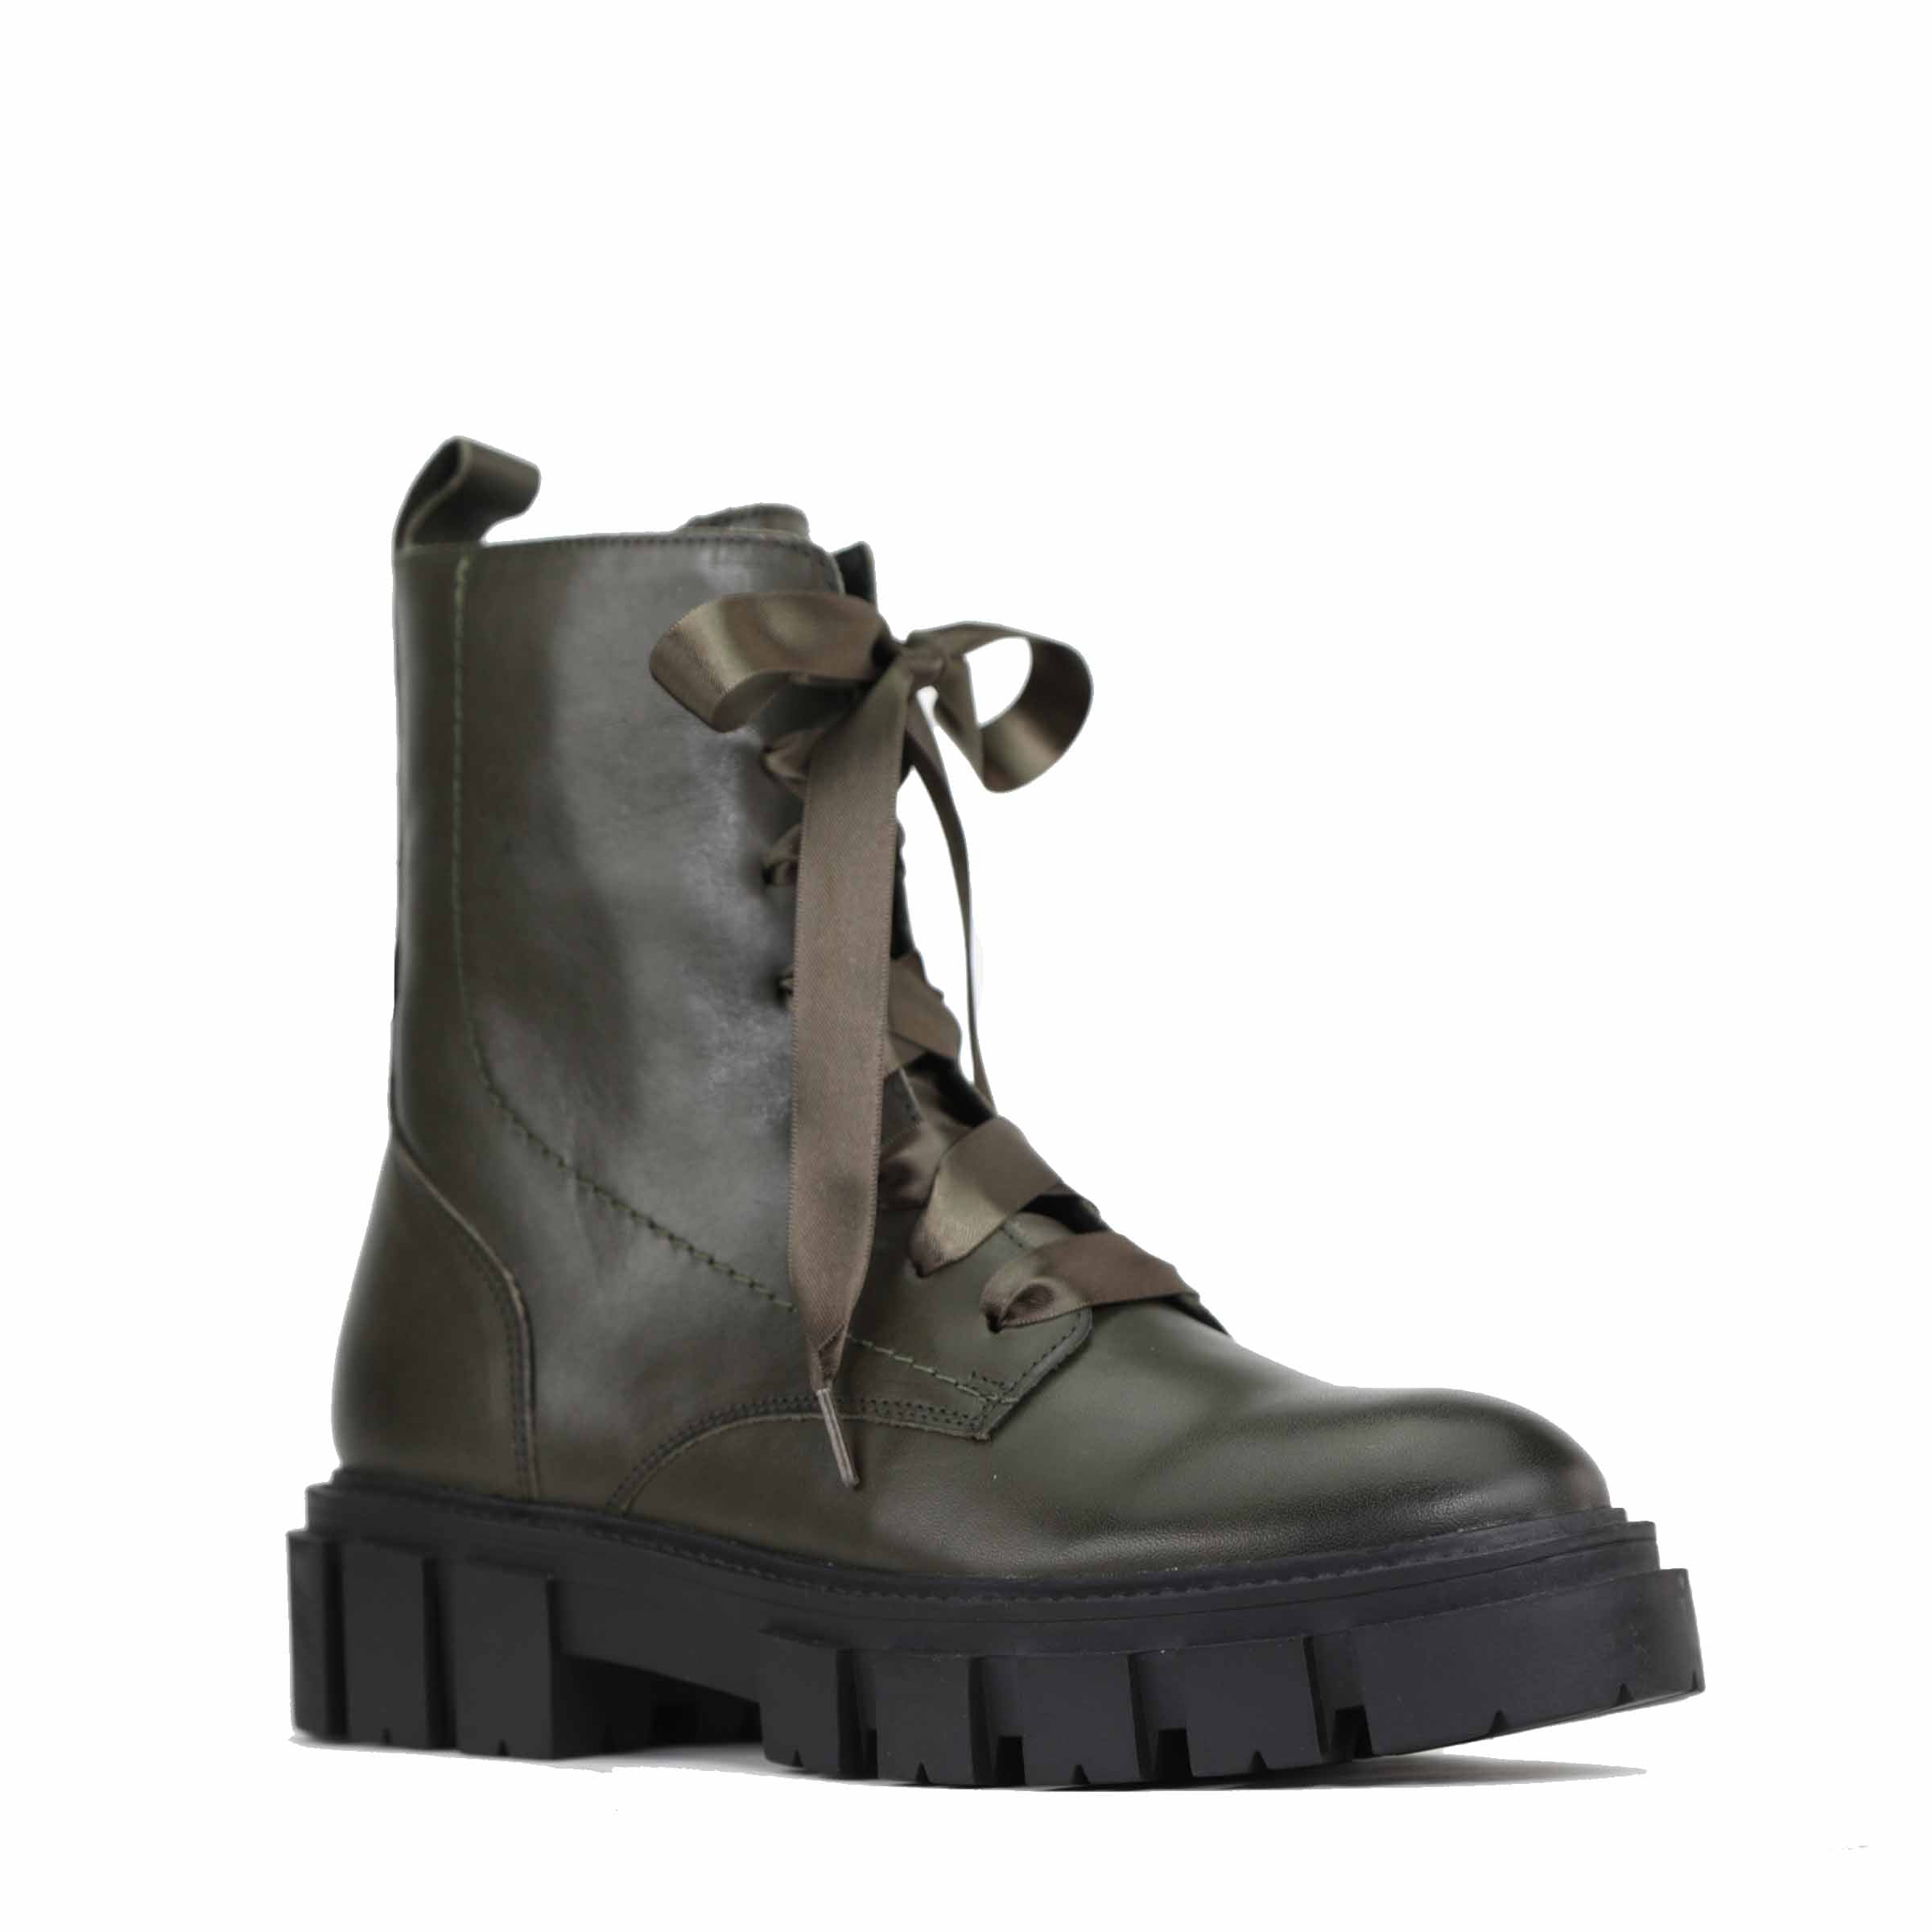 FEBE - EOS Footwear - Combat Boots #color_Dark/olive